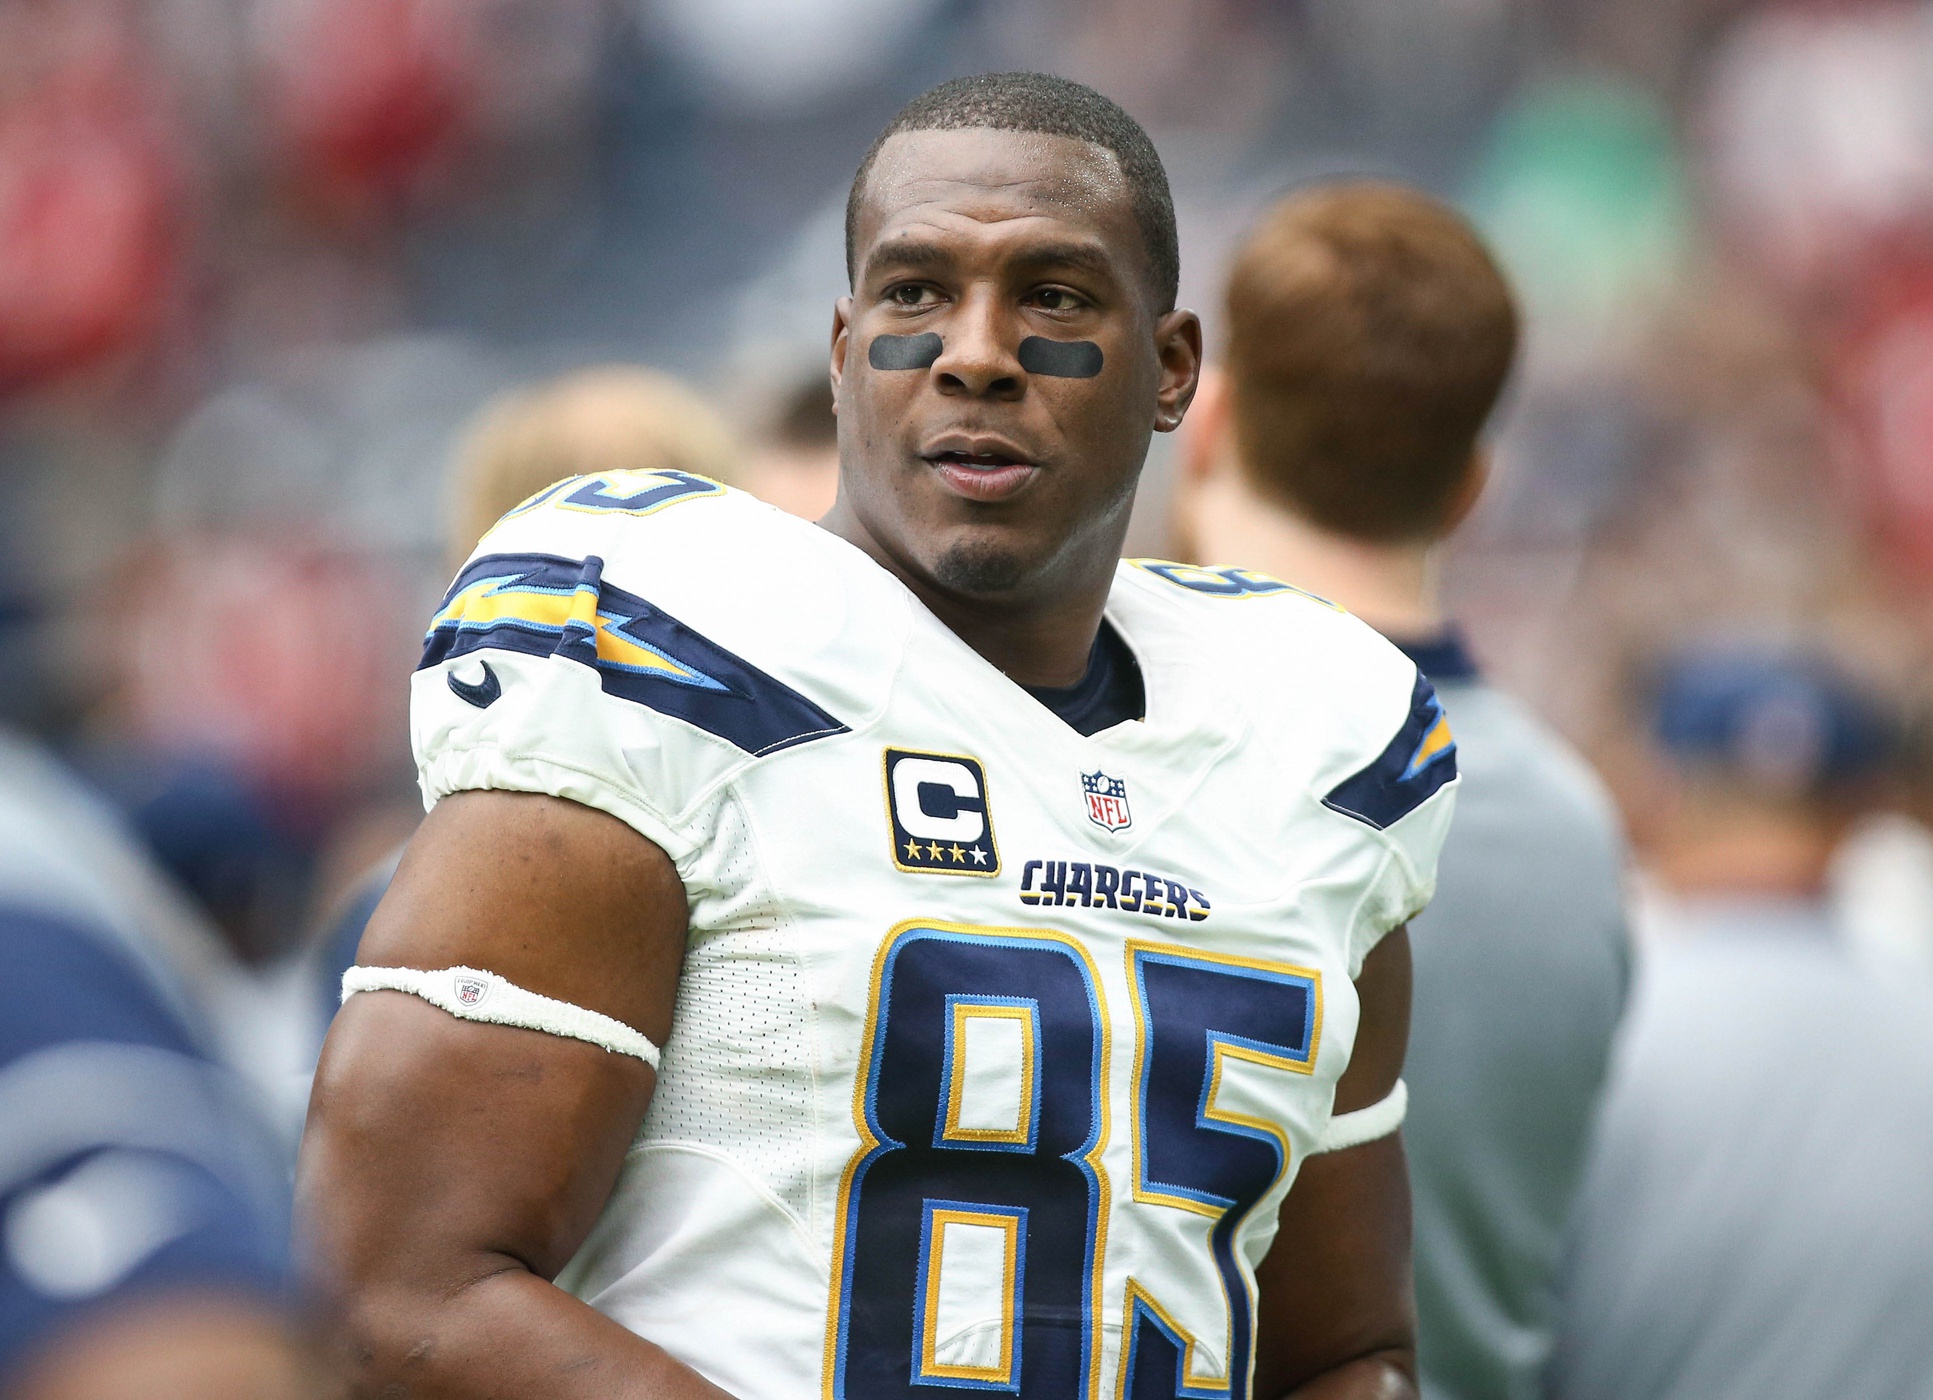 Antonio Gates (85) on the sideline during the game against the Houston Texans at NRG Stadium.